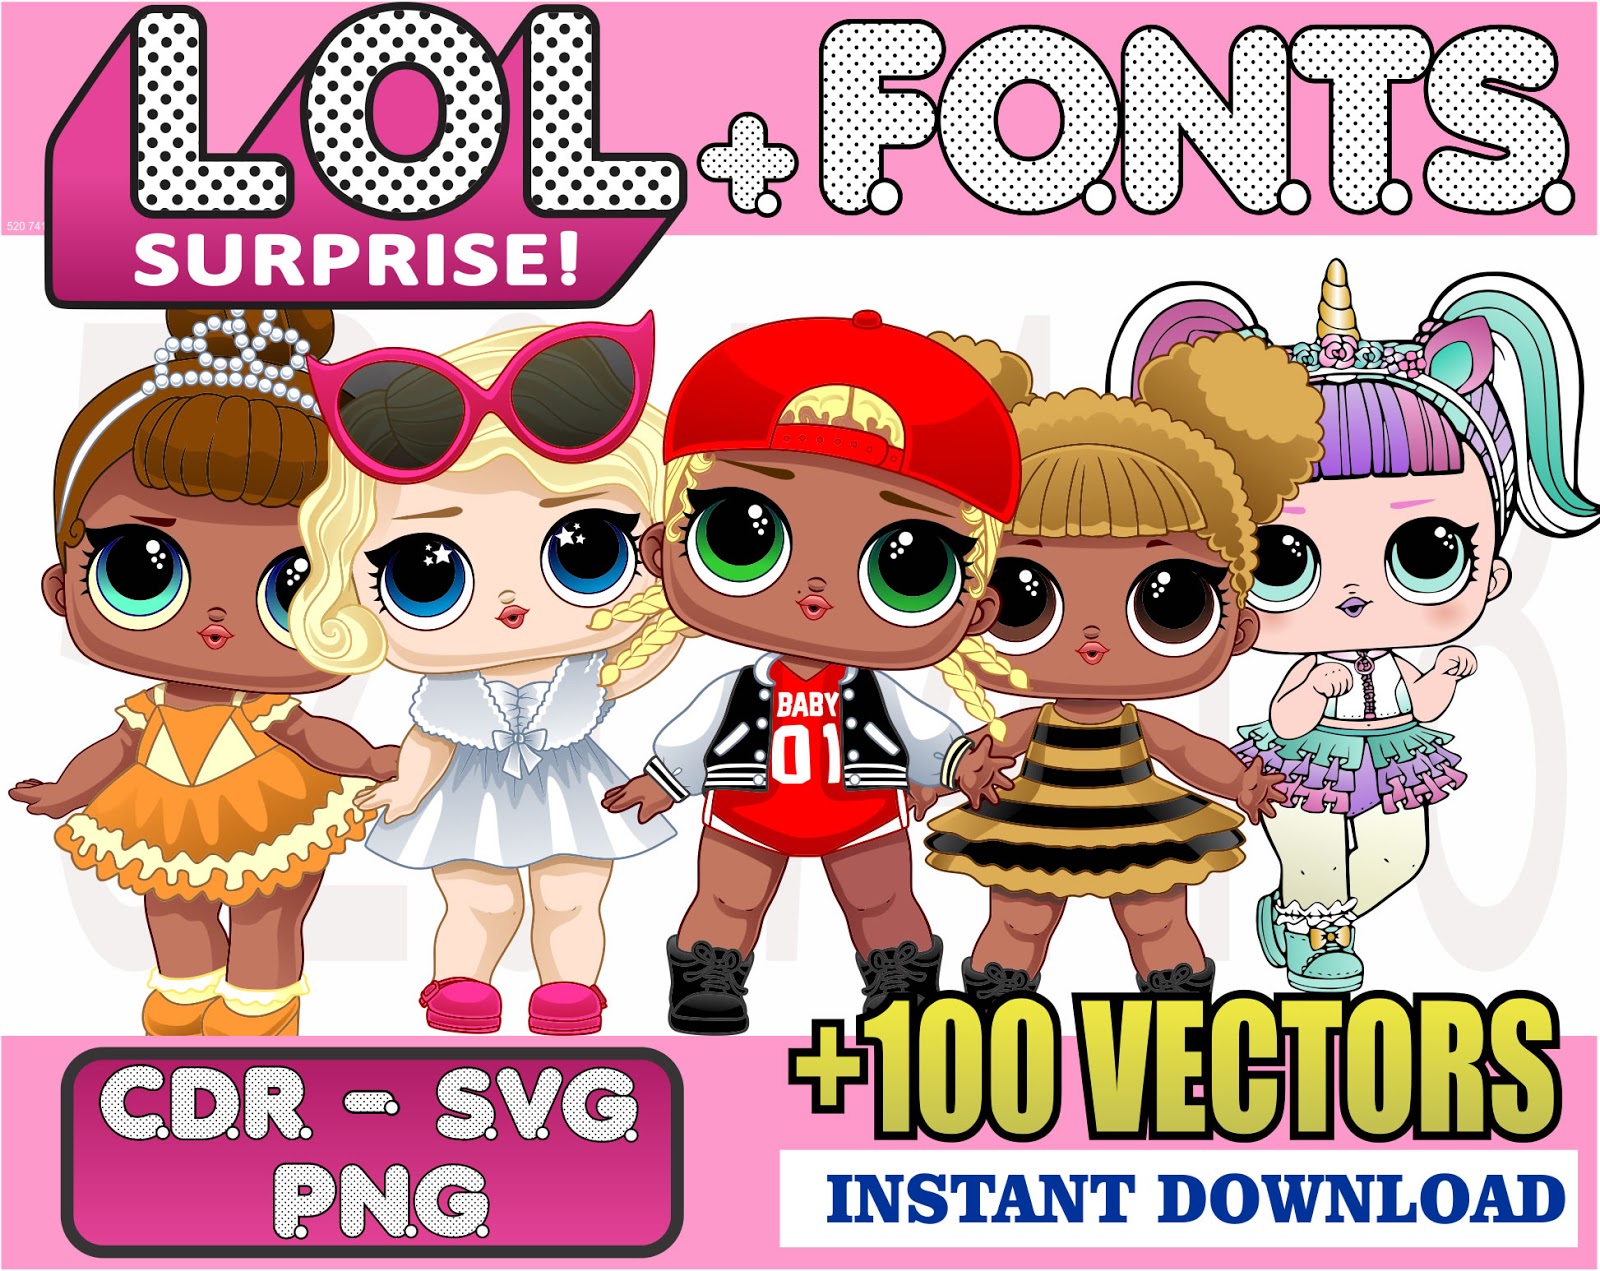 100 LOL Surprise Doll Vectors In CDR, PNG And SVG Instant Download ...